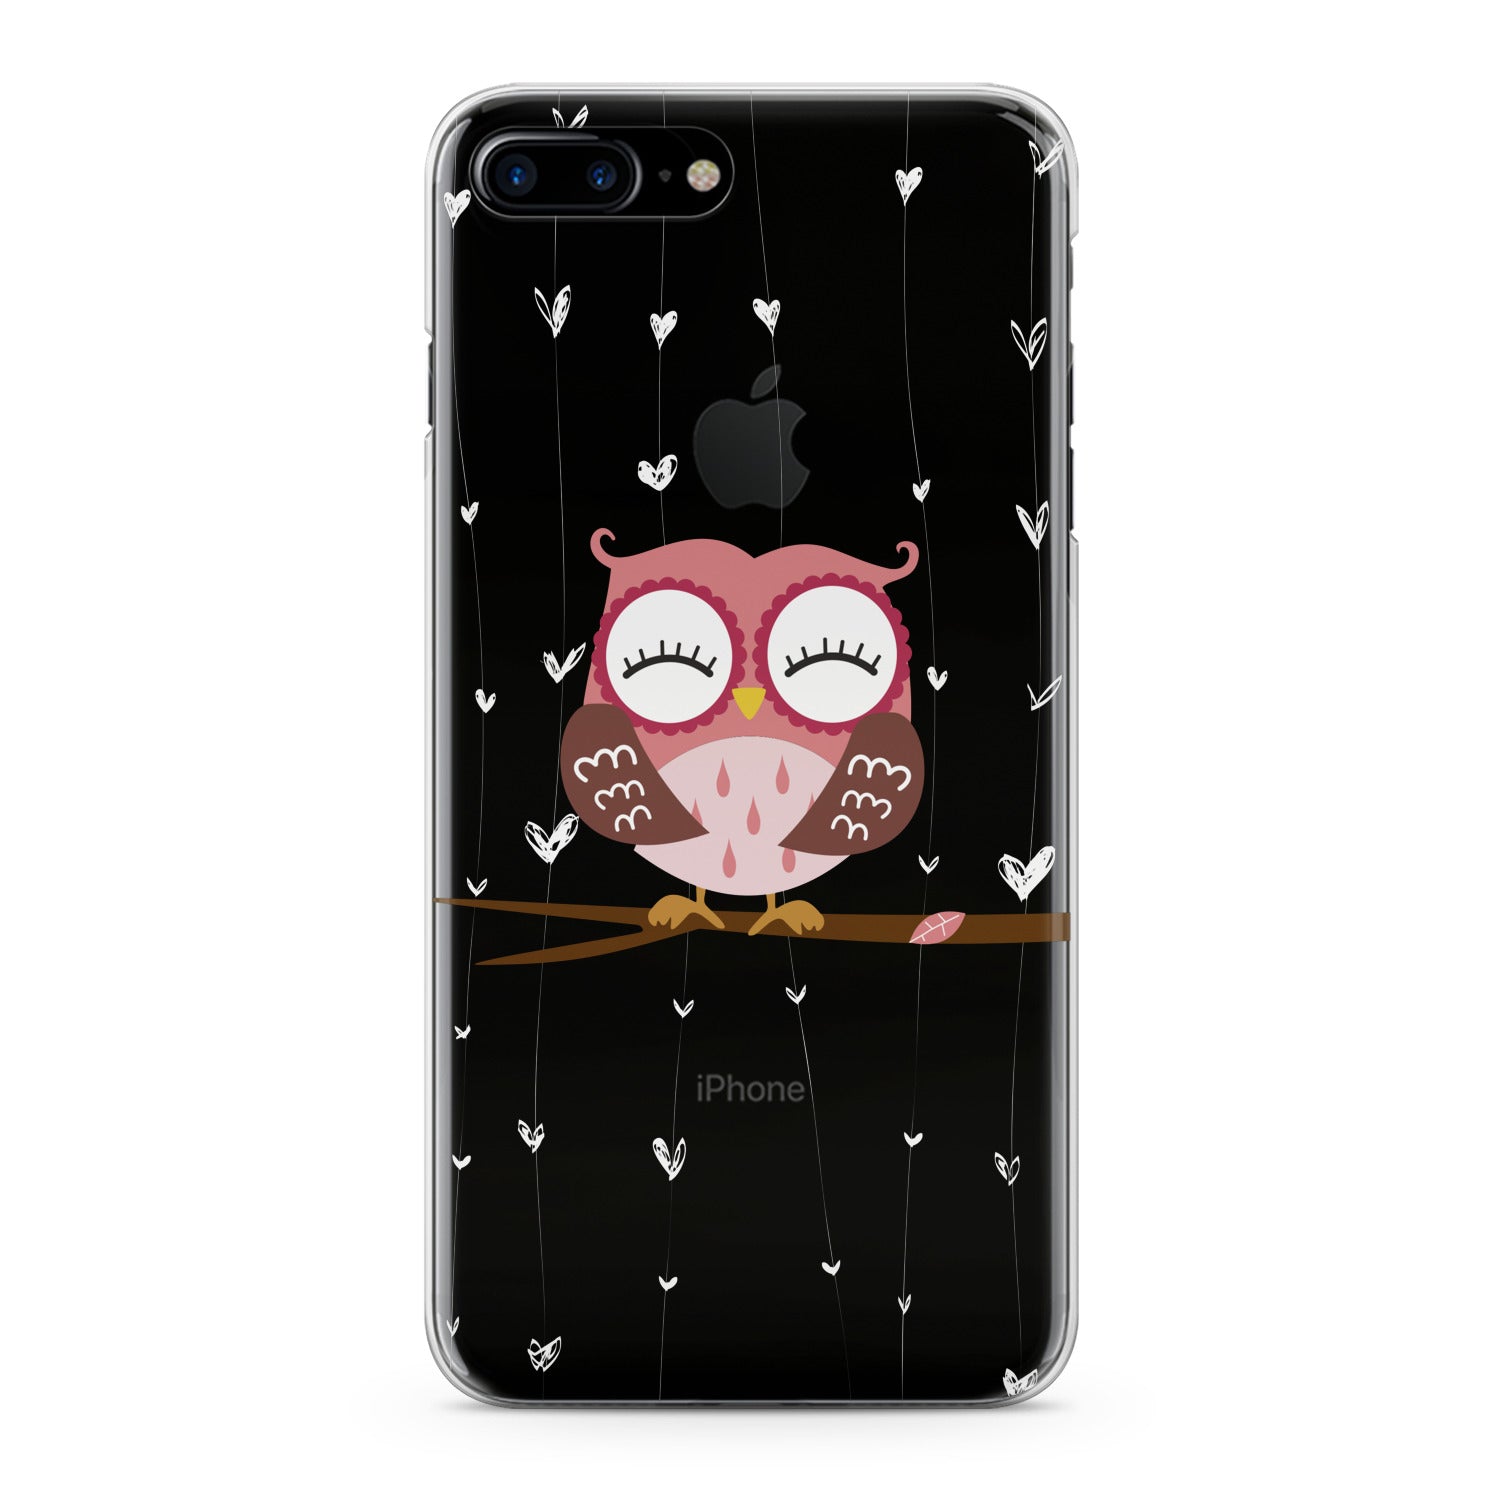 Lex Altern Cute Owl Phone Case for your iPhone & Android phone.